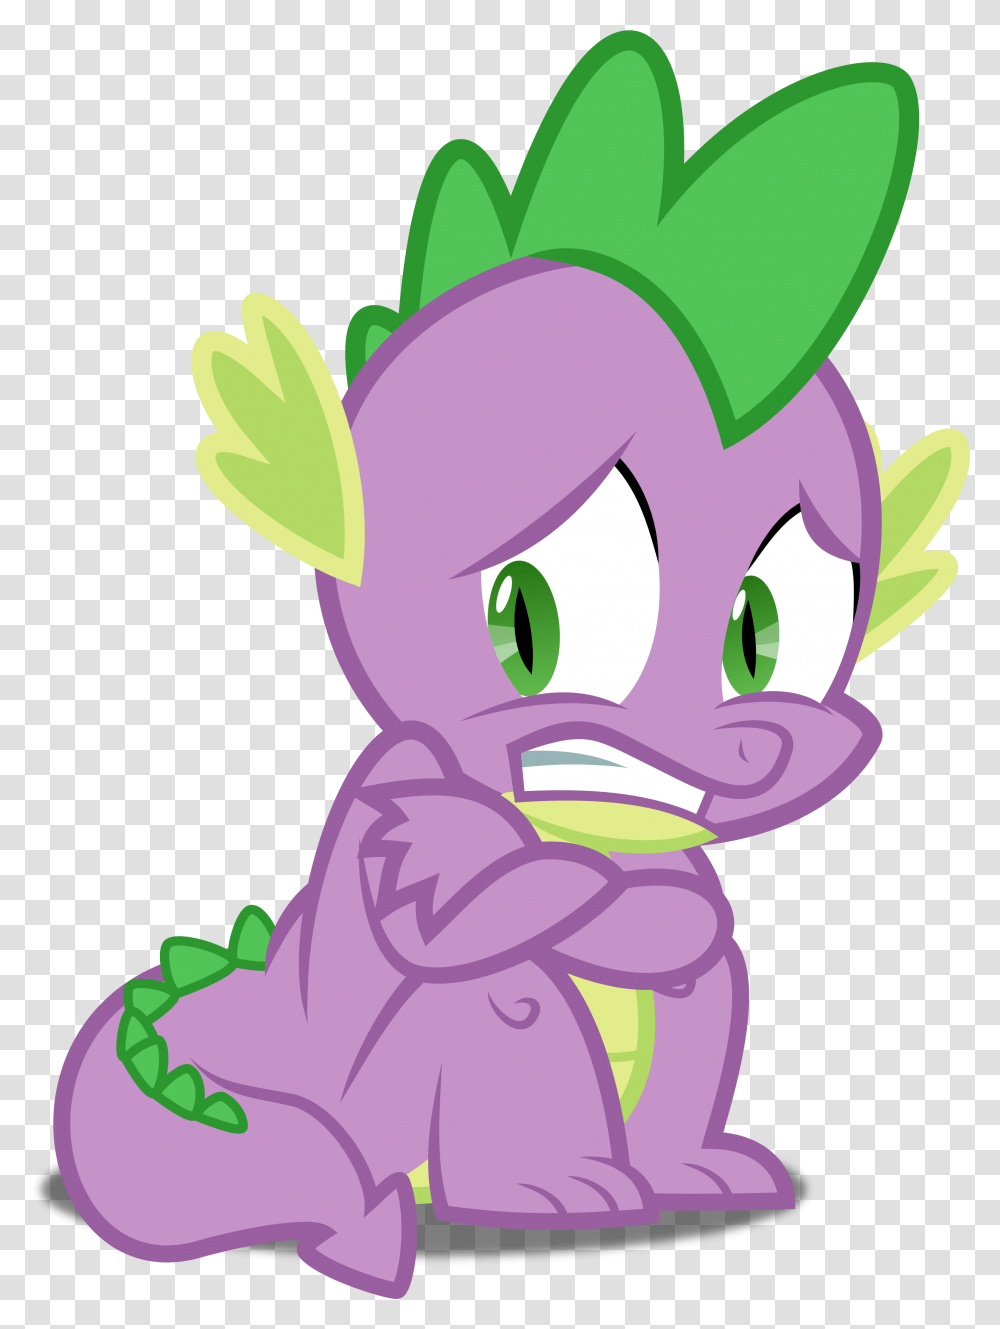 X 3786 My Little Pony Spike Scared, Purple, Floral Design Transparent Png